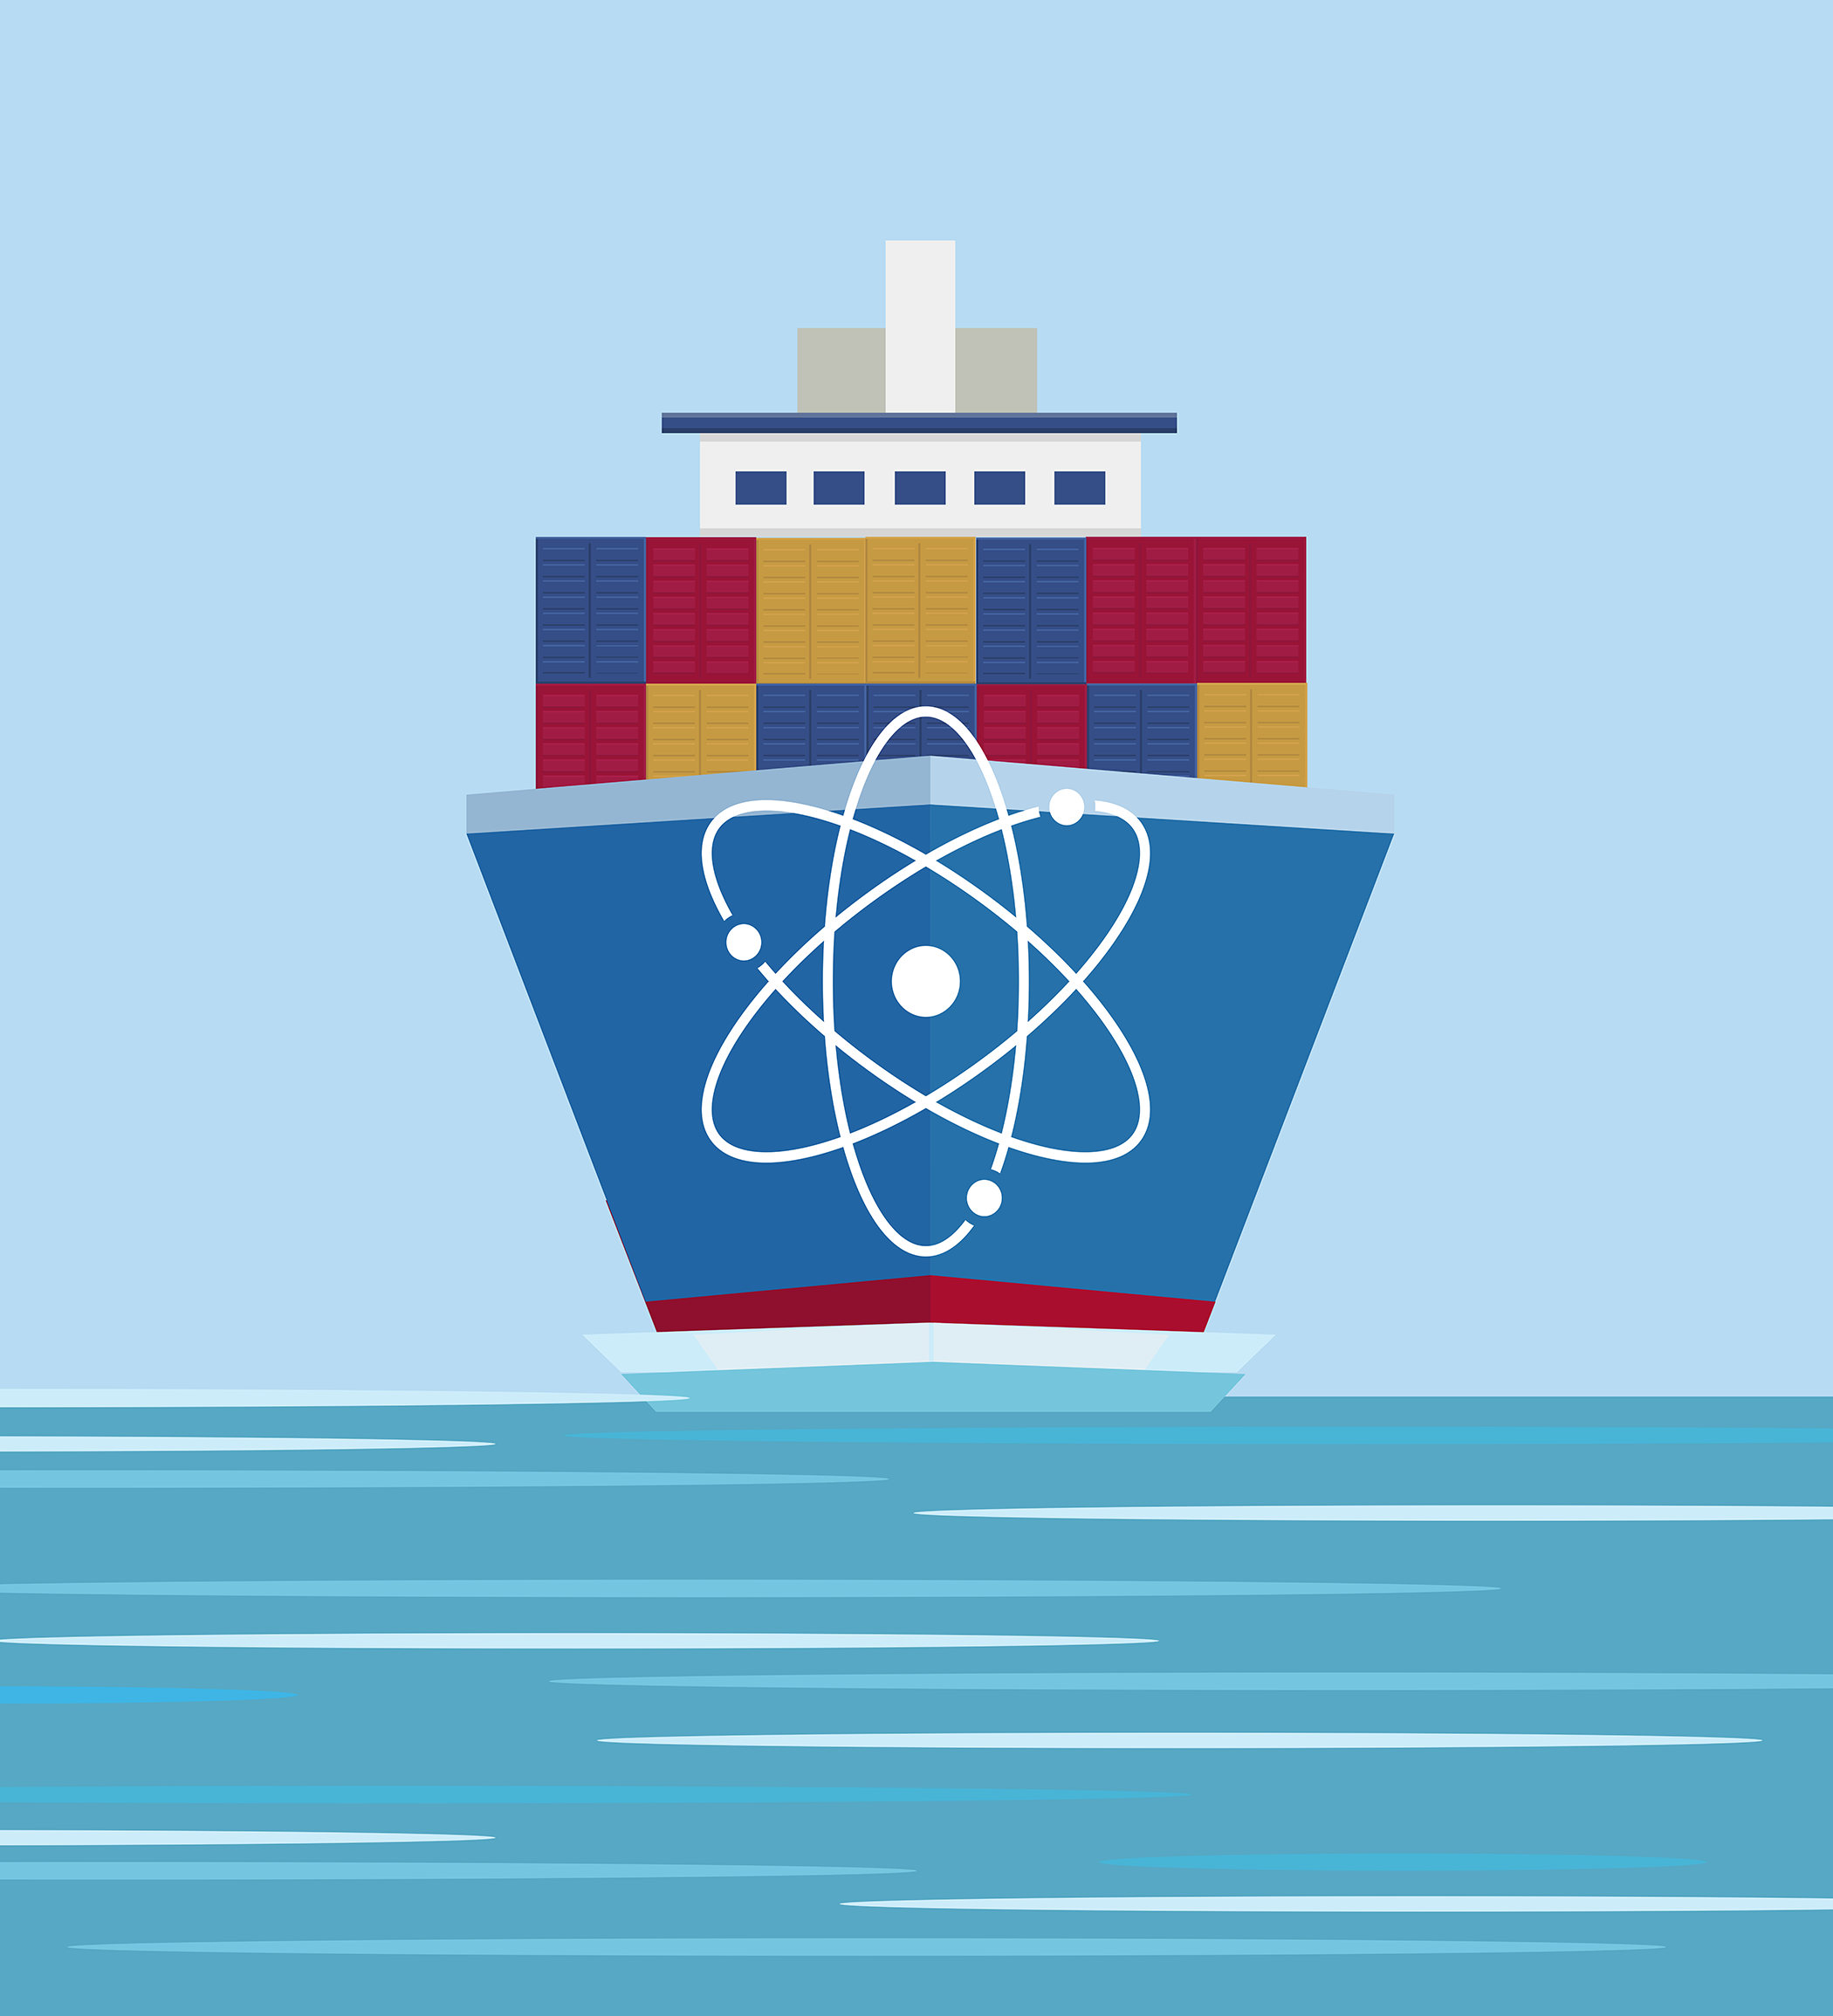 An illustration of a cargo ship on the water with a nuclear icon in the front.  